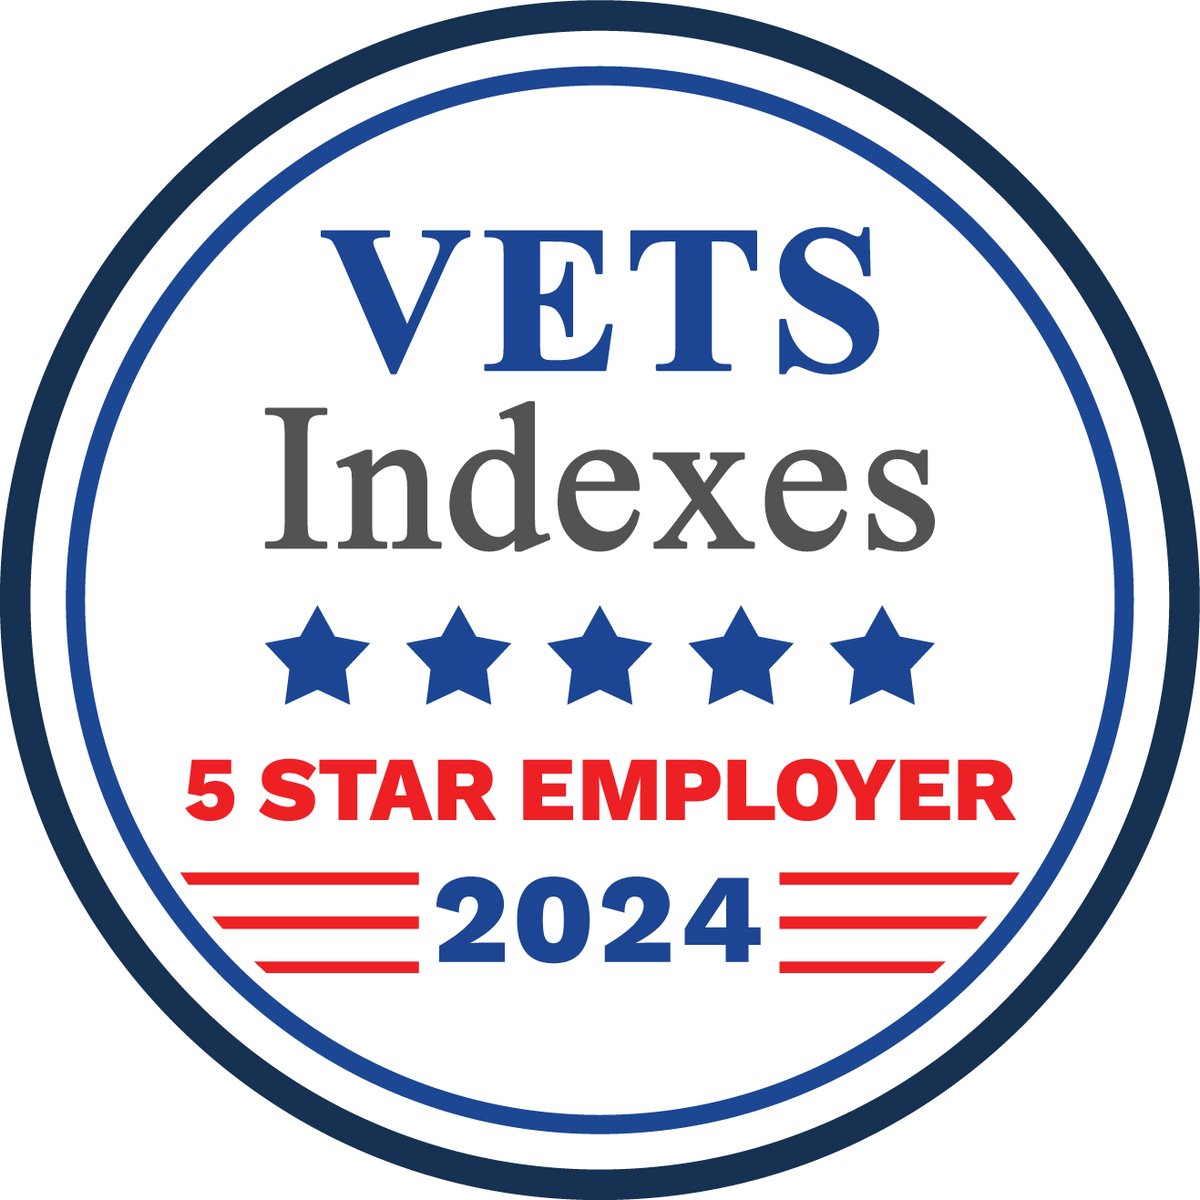 🇺🇸 We proudly announce our designation as a VETS Indexes 5 Star Employer in the 2024 @VETSIndexes Employer Awards, recognizing our commitment to recruiting, hiring, retaining, developing, and supporting veterans and the military-connected community. ➡️ bit.ly/3Jk3Tfh